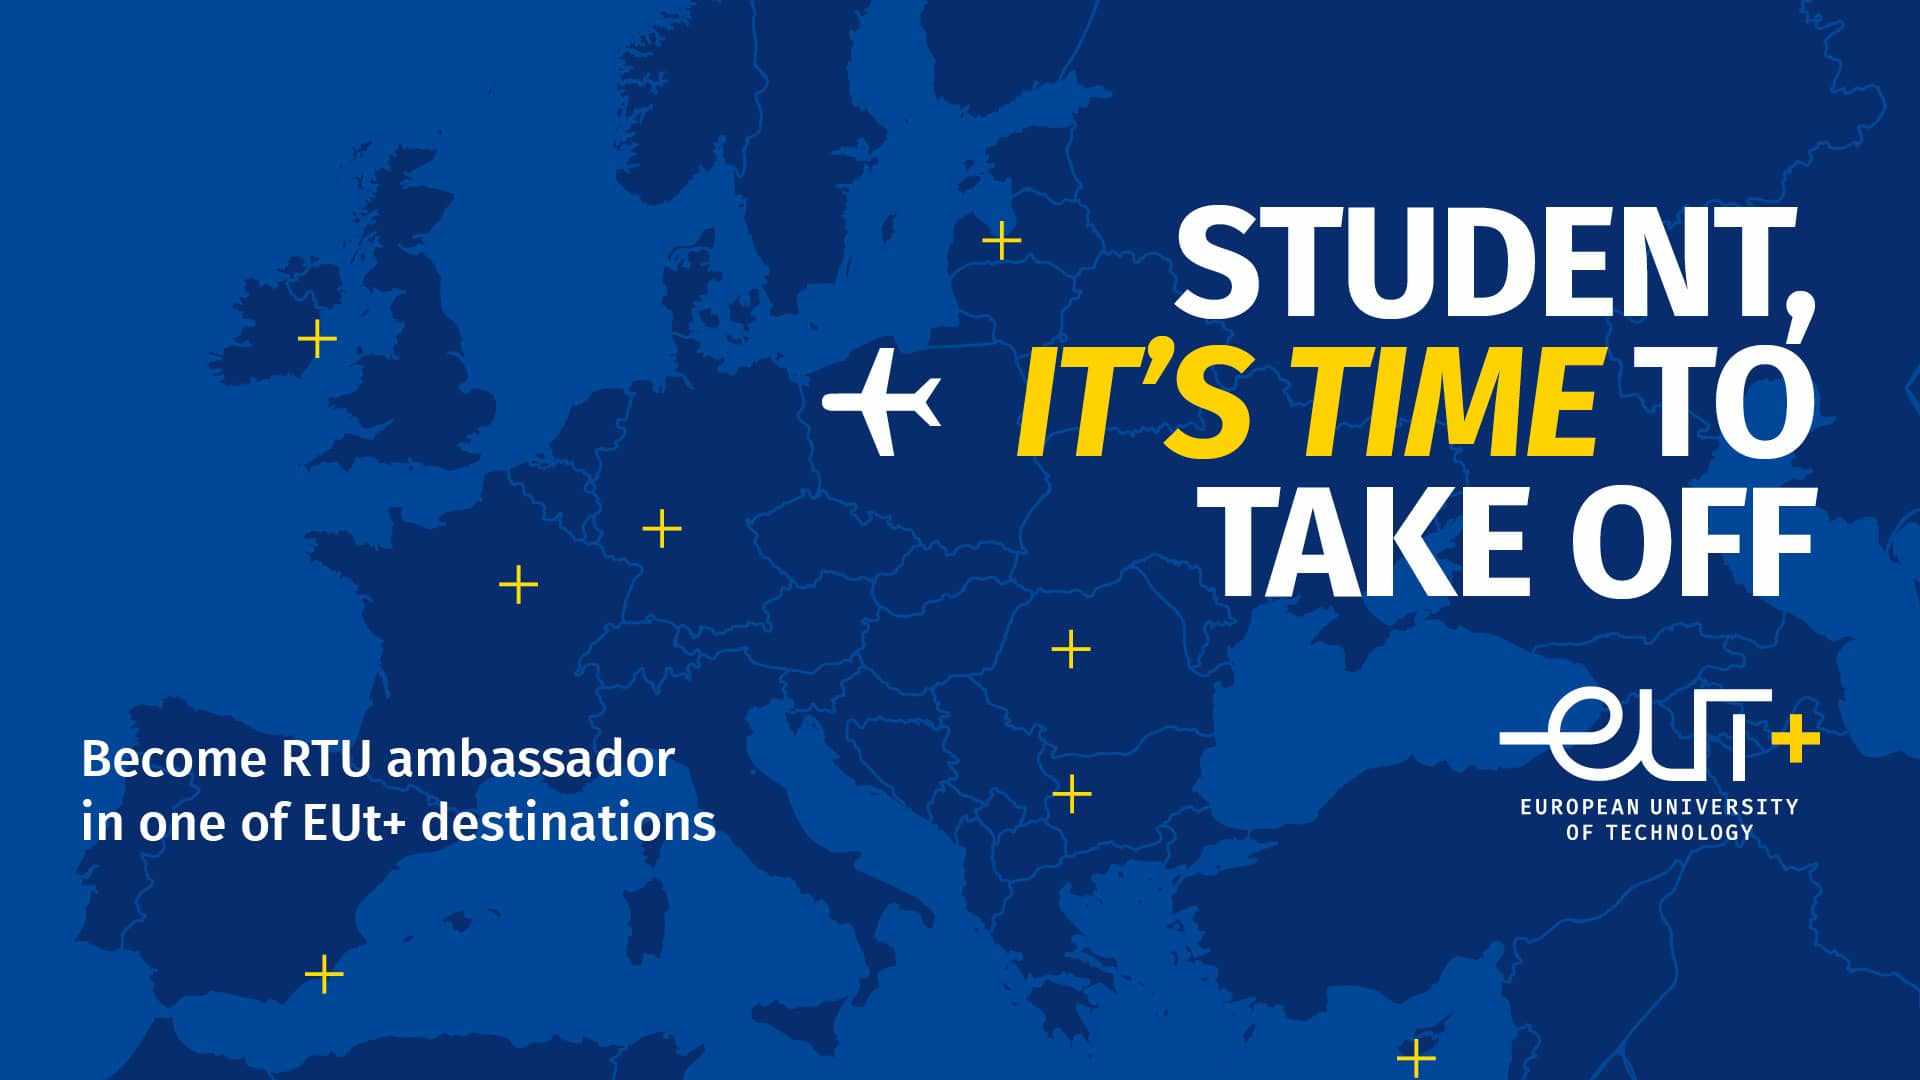 Apply for an Erasmus+ scholarship now and enjoy a mobility period in EUt+ - European University of Technology